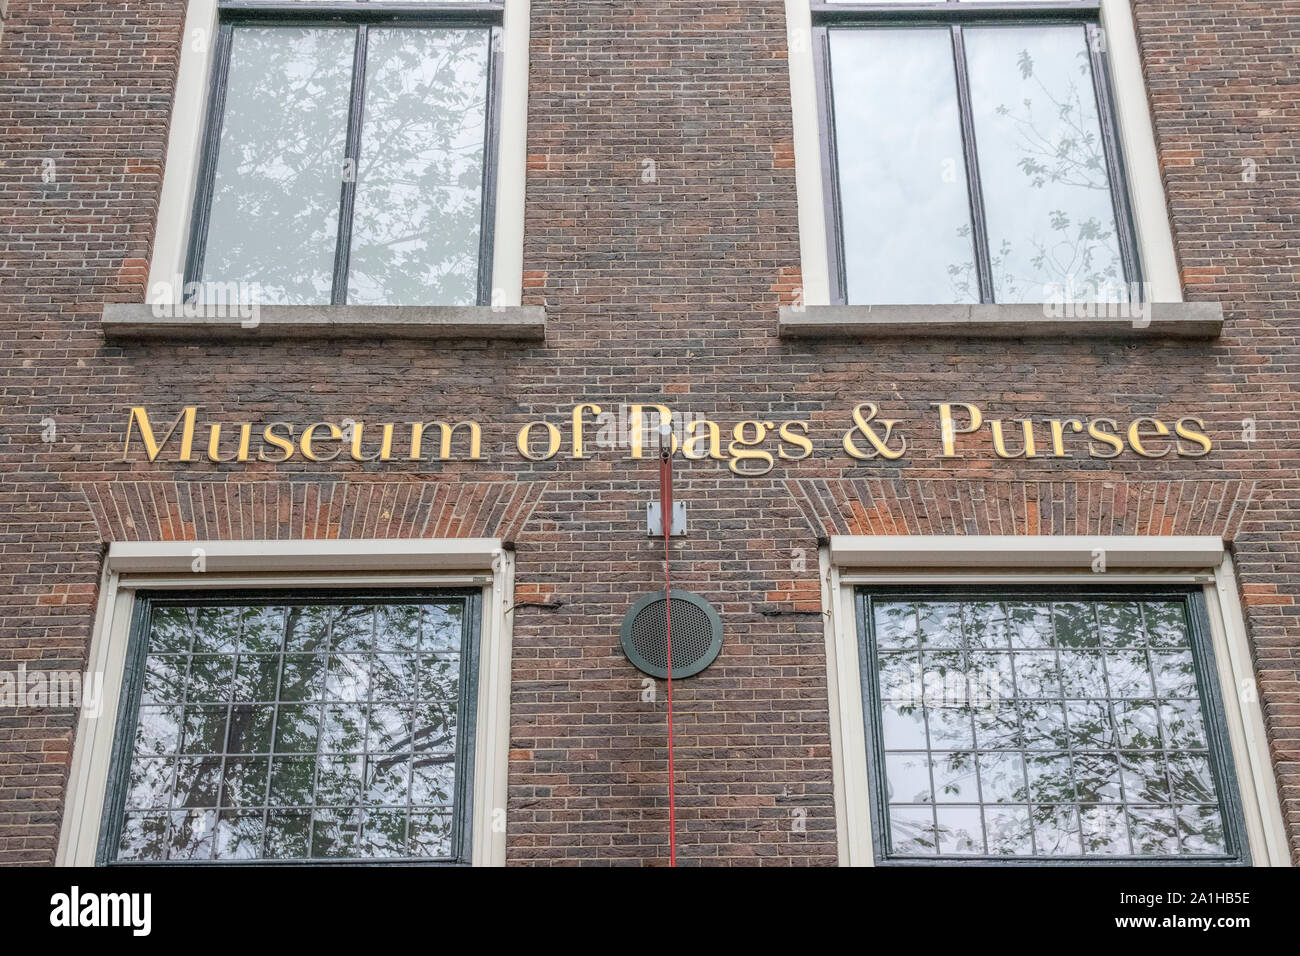 File:Museum of Bags and Purses, Amsterdam (8807426121).jpg - Wikipedia